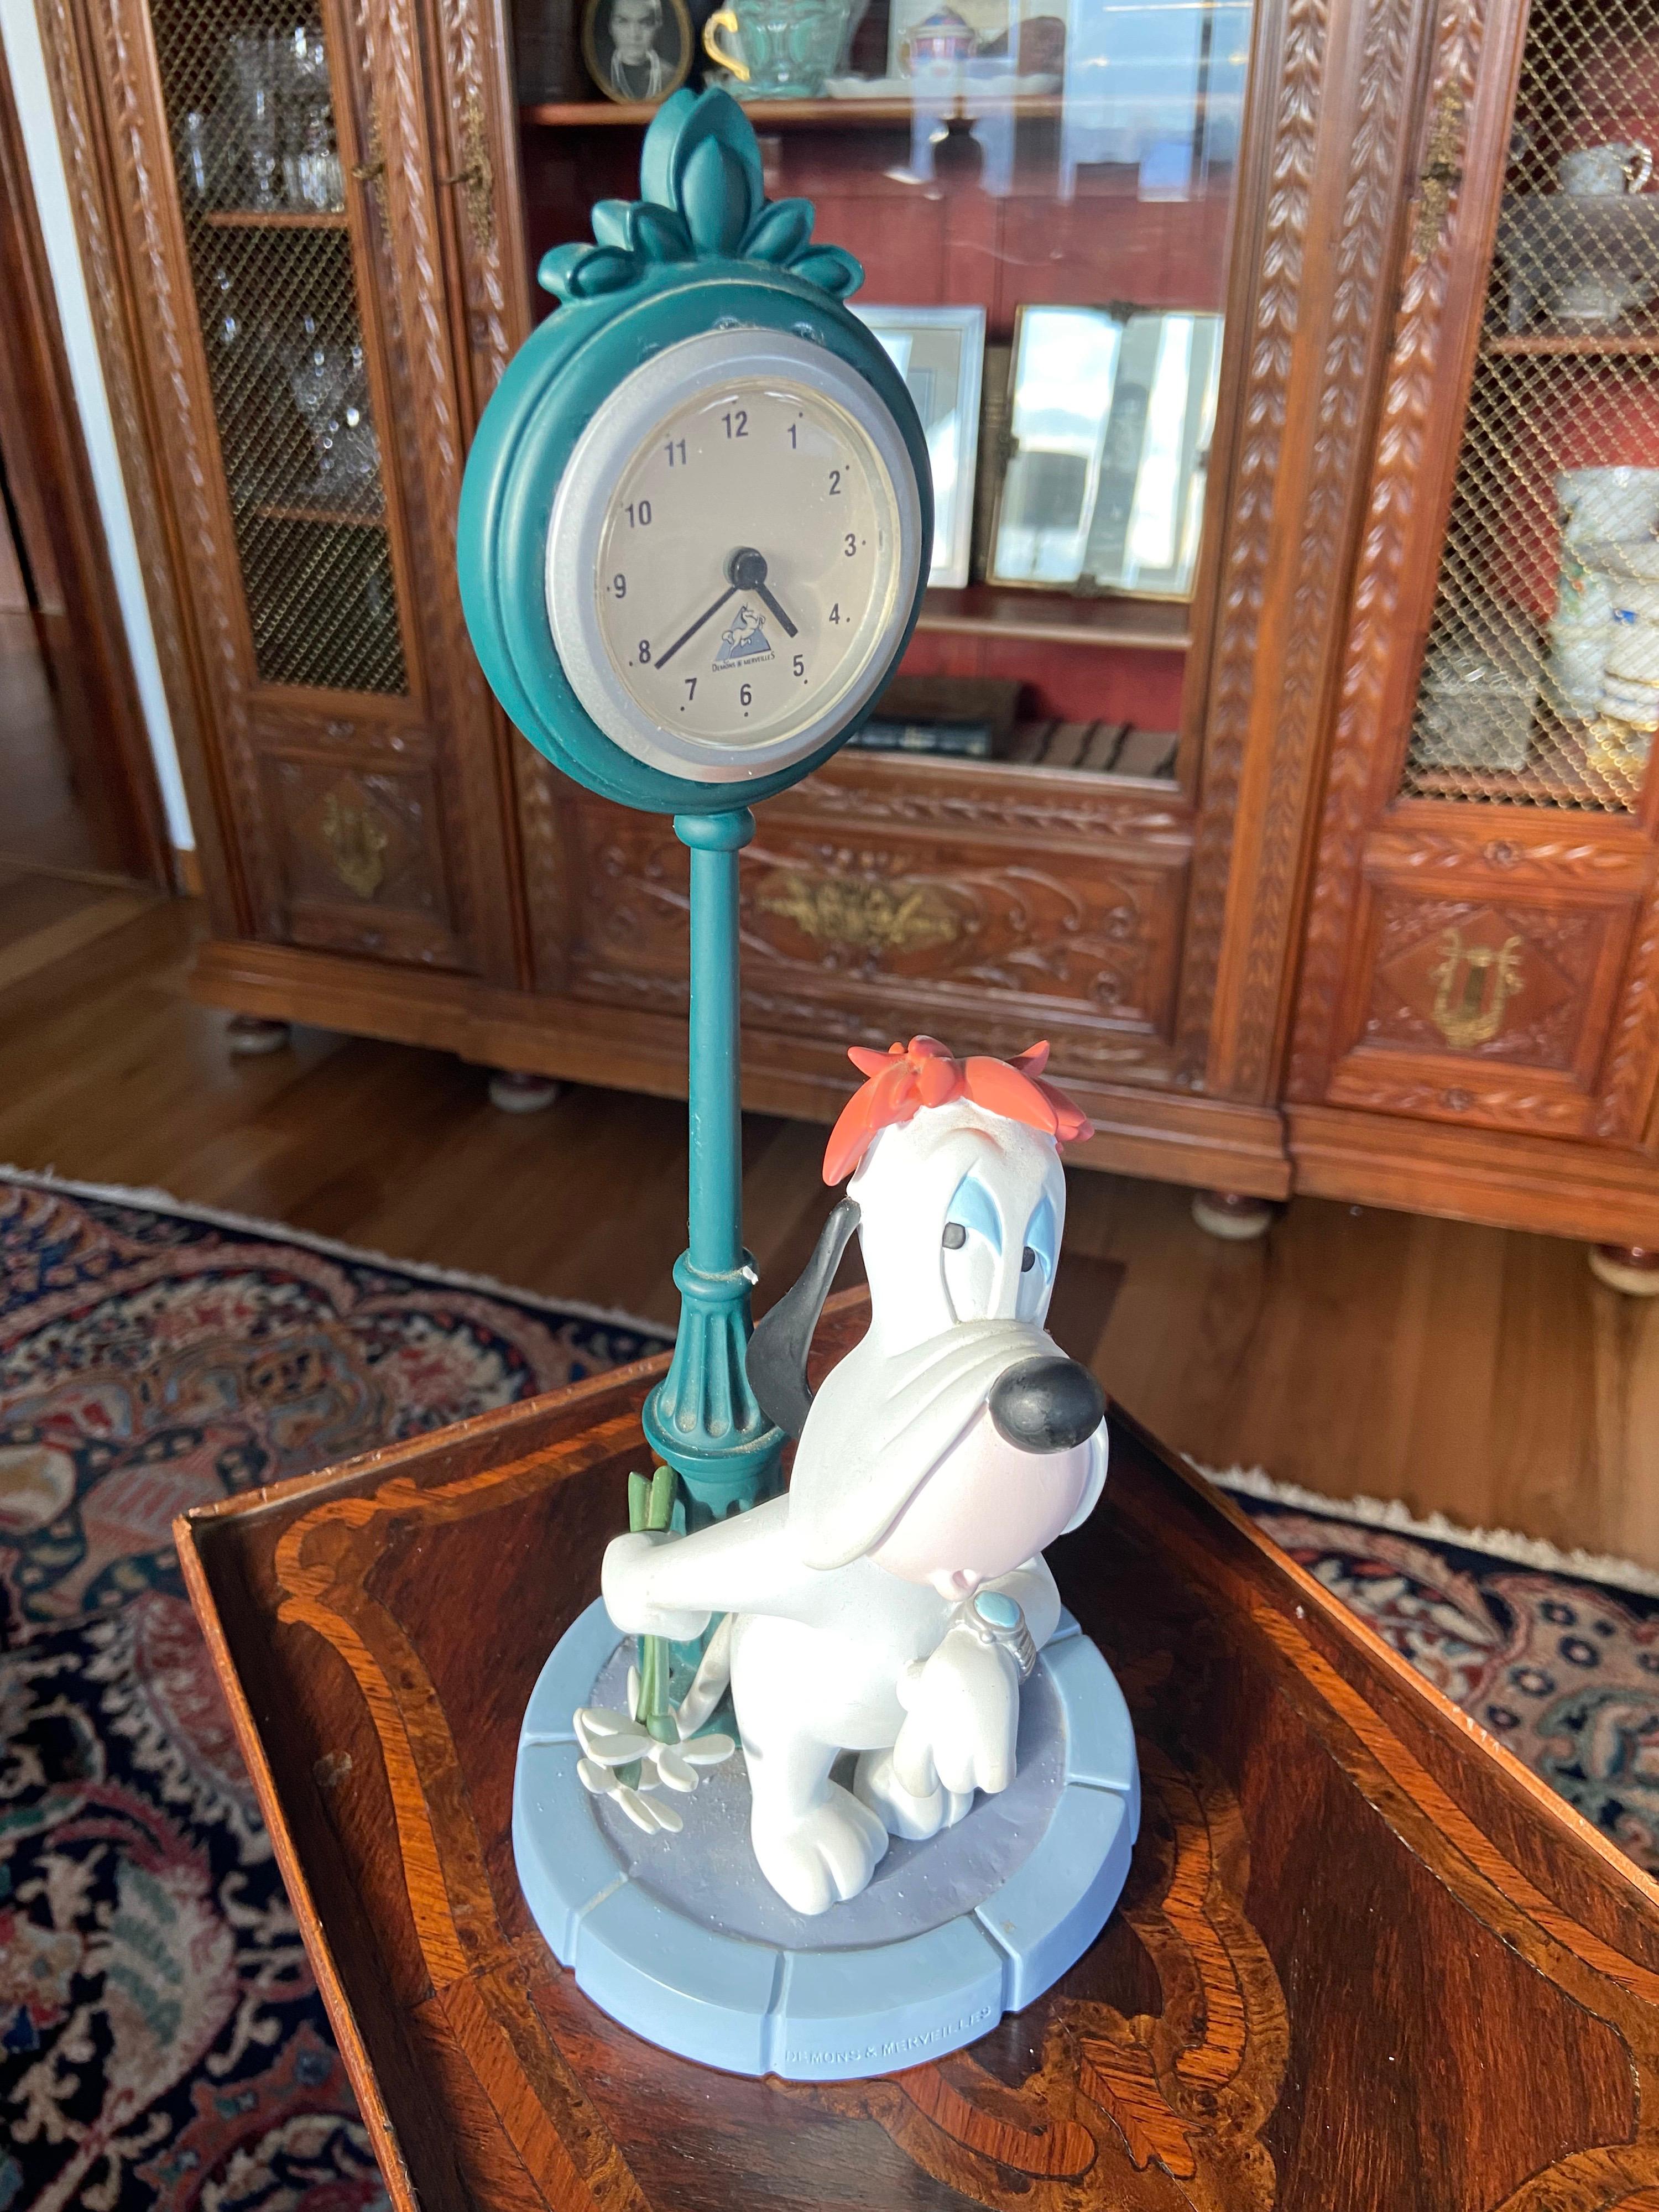 American Rare and Collectable Droopy by the Clock by Demons & Merveilles Figurine Statue For Sale